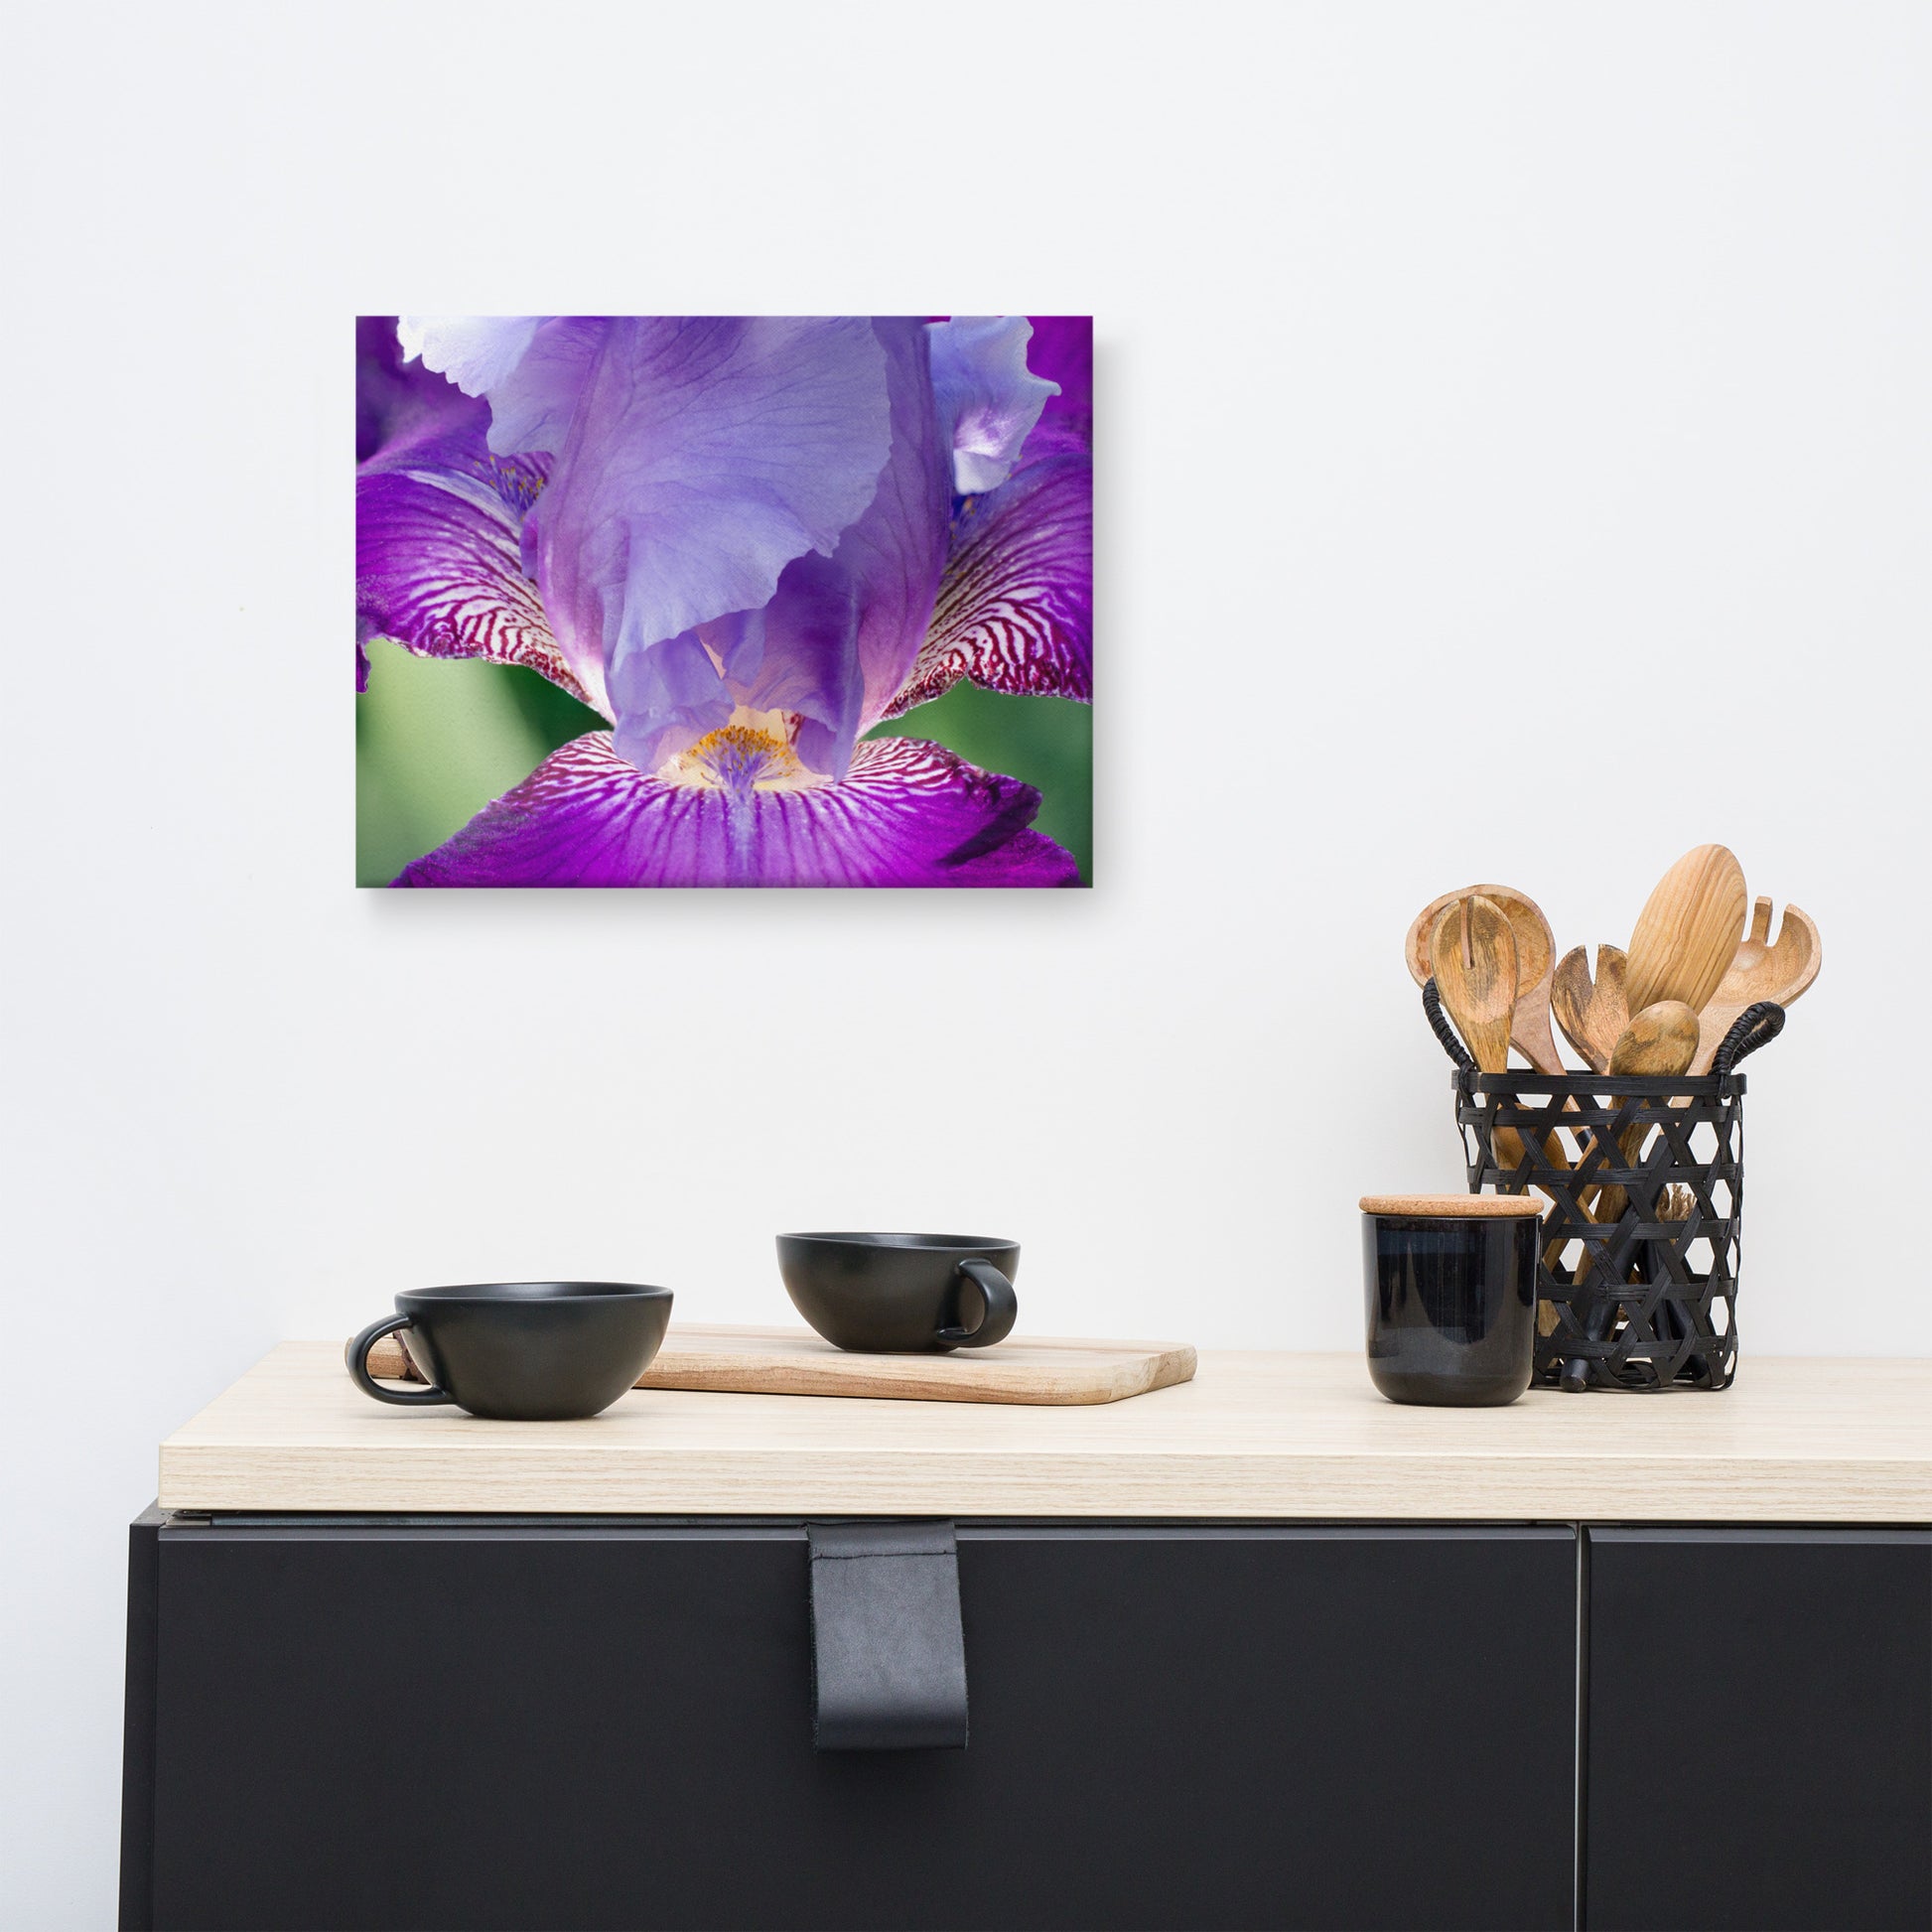 Purple Pictures For Bedroom: Glowing Iris - Botanical / Floral / Flora / Flowers / Nature Photograph Canvas Wall Art Print - Artwork